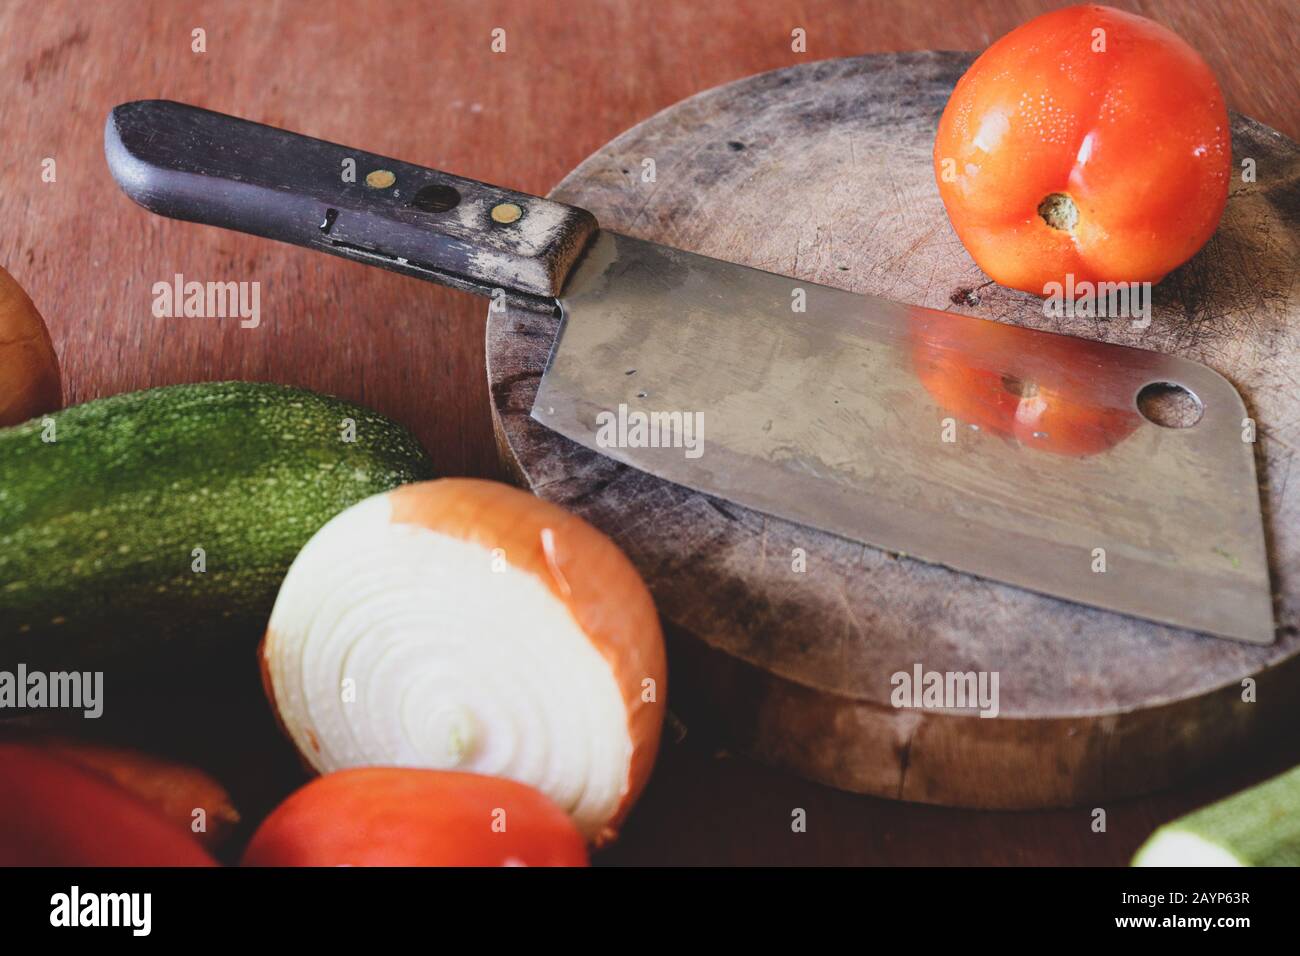 Still life showing concept of gastronomy, cooking, cuisine,clean organic diet and vegan lifestyle Stock Photo